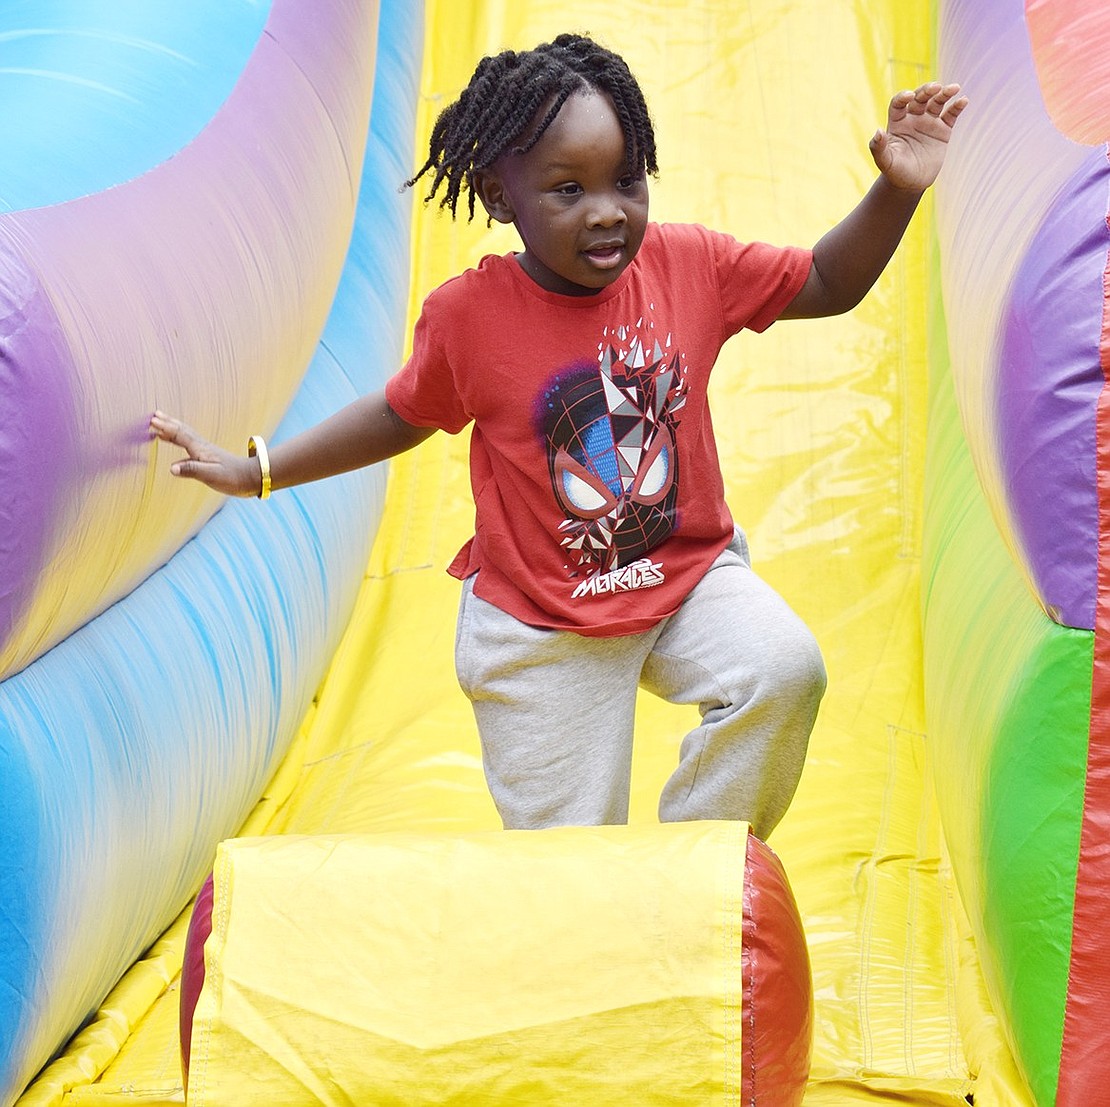 After bouncing down the giant inflatable slide, 4-year-old Greenwich, Conn., resident Joshua Lester is eager to get back in line for more fun.